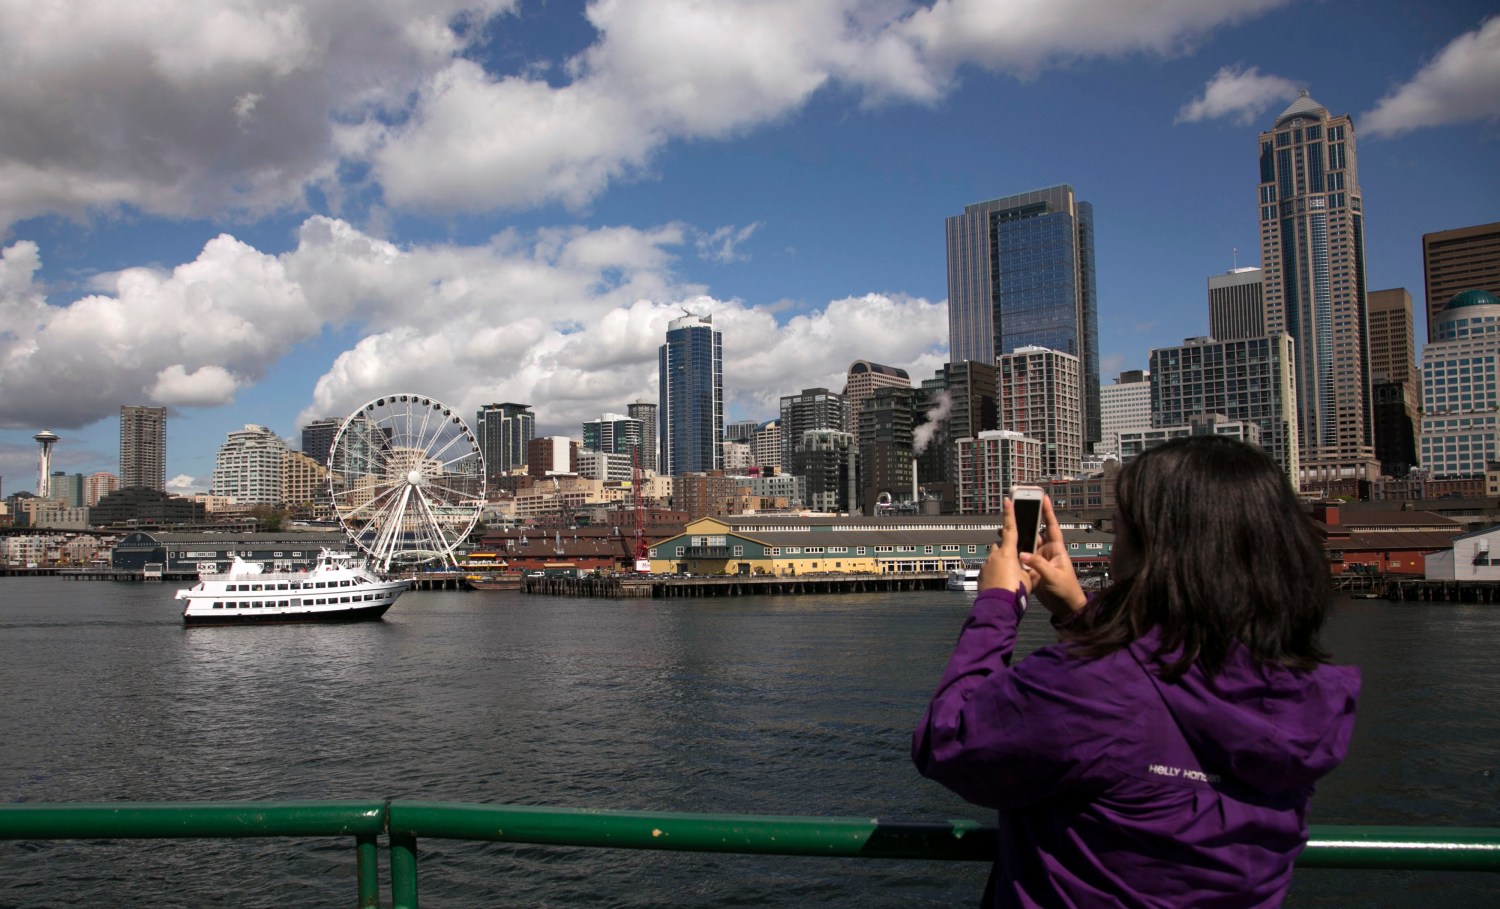 A passenger on the Bainbridge Island Ferry takes a cell phone photo of the skyline in Seattle, Washington April 9, 2014. Picture taken April 9, 2014. To match story TRAVEL-SEATTLE/ REUTERS/Jason Redmond (UNITED STATES - Tags: CITYSCAPE TRAVEL)